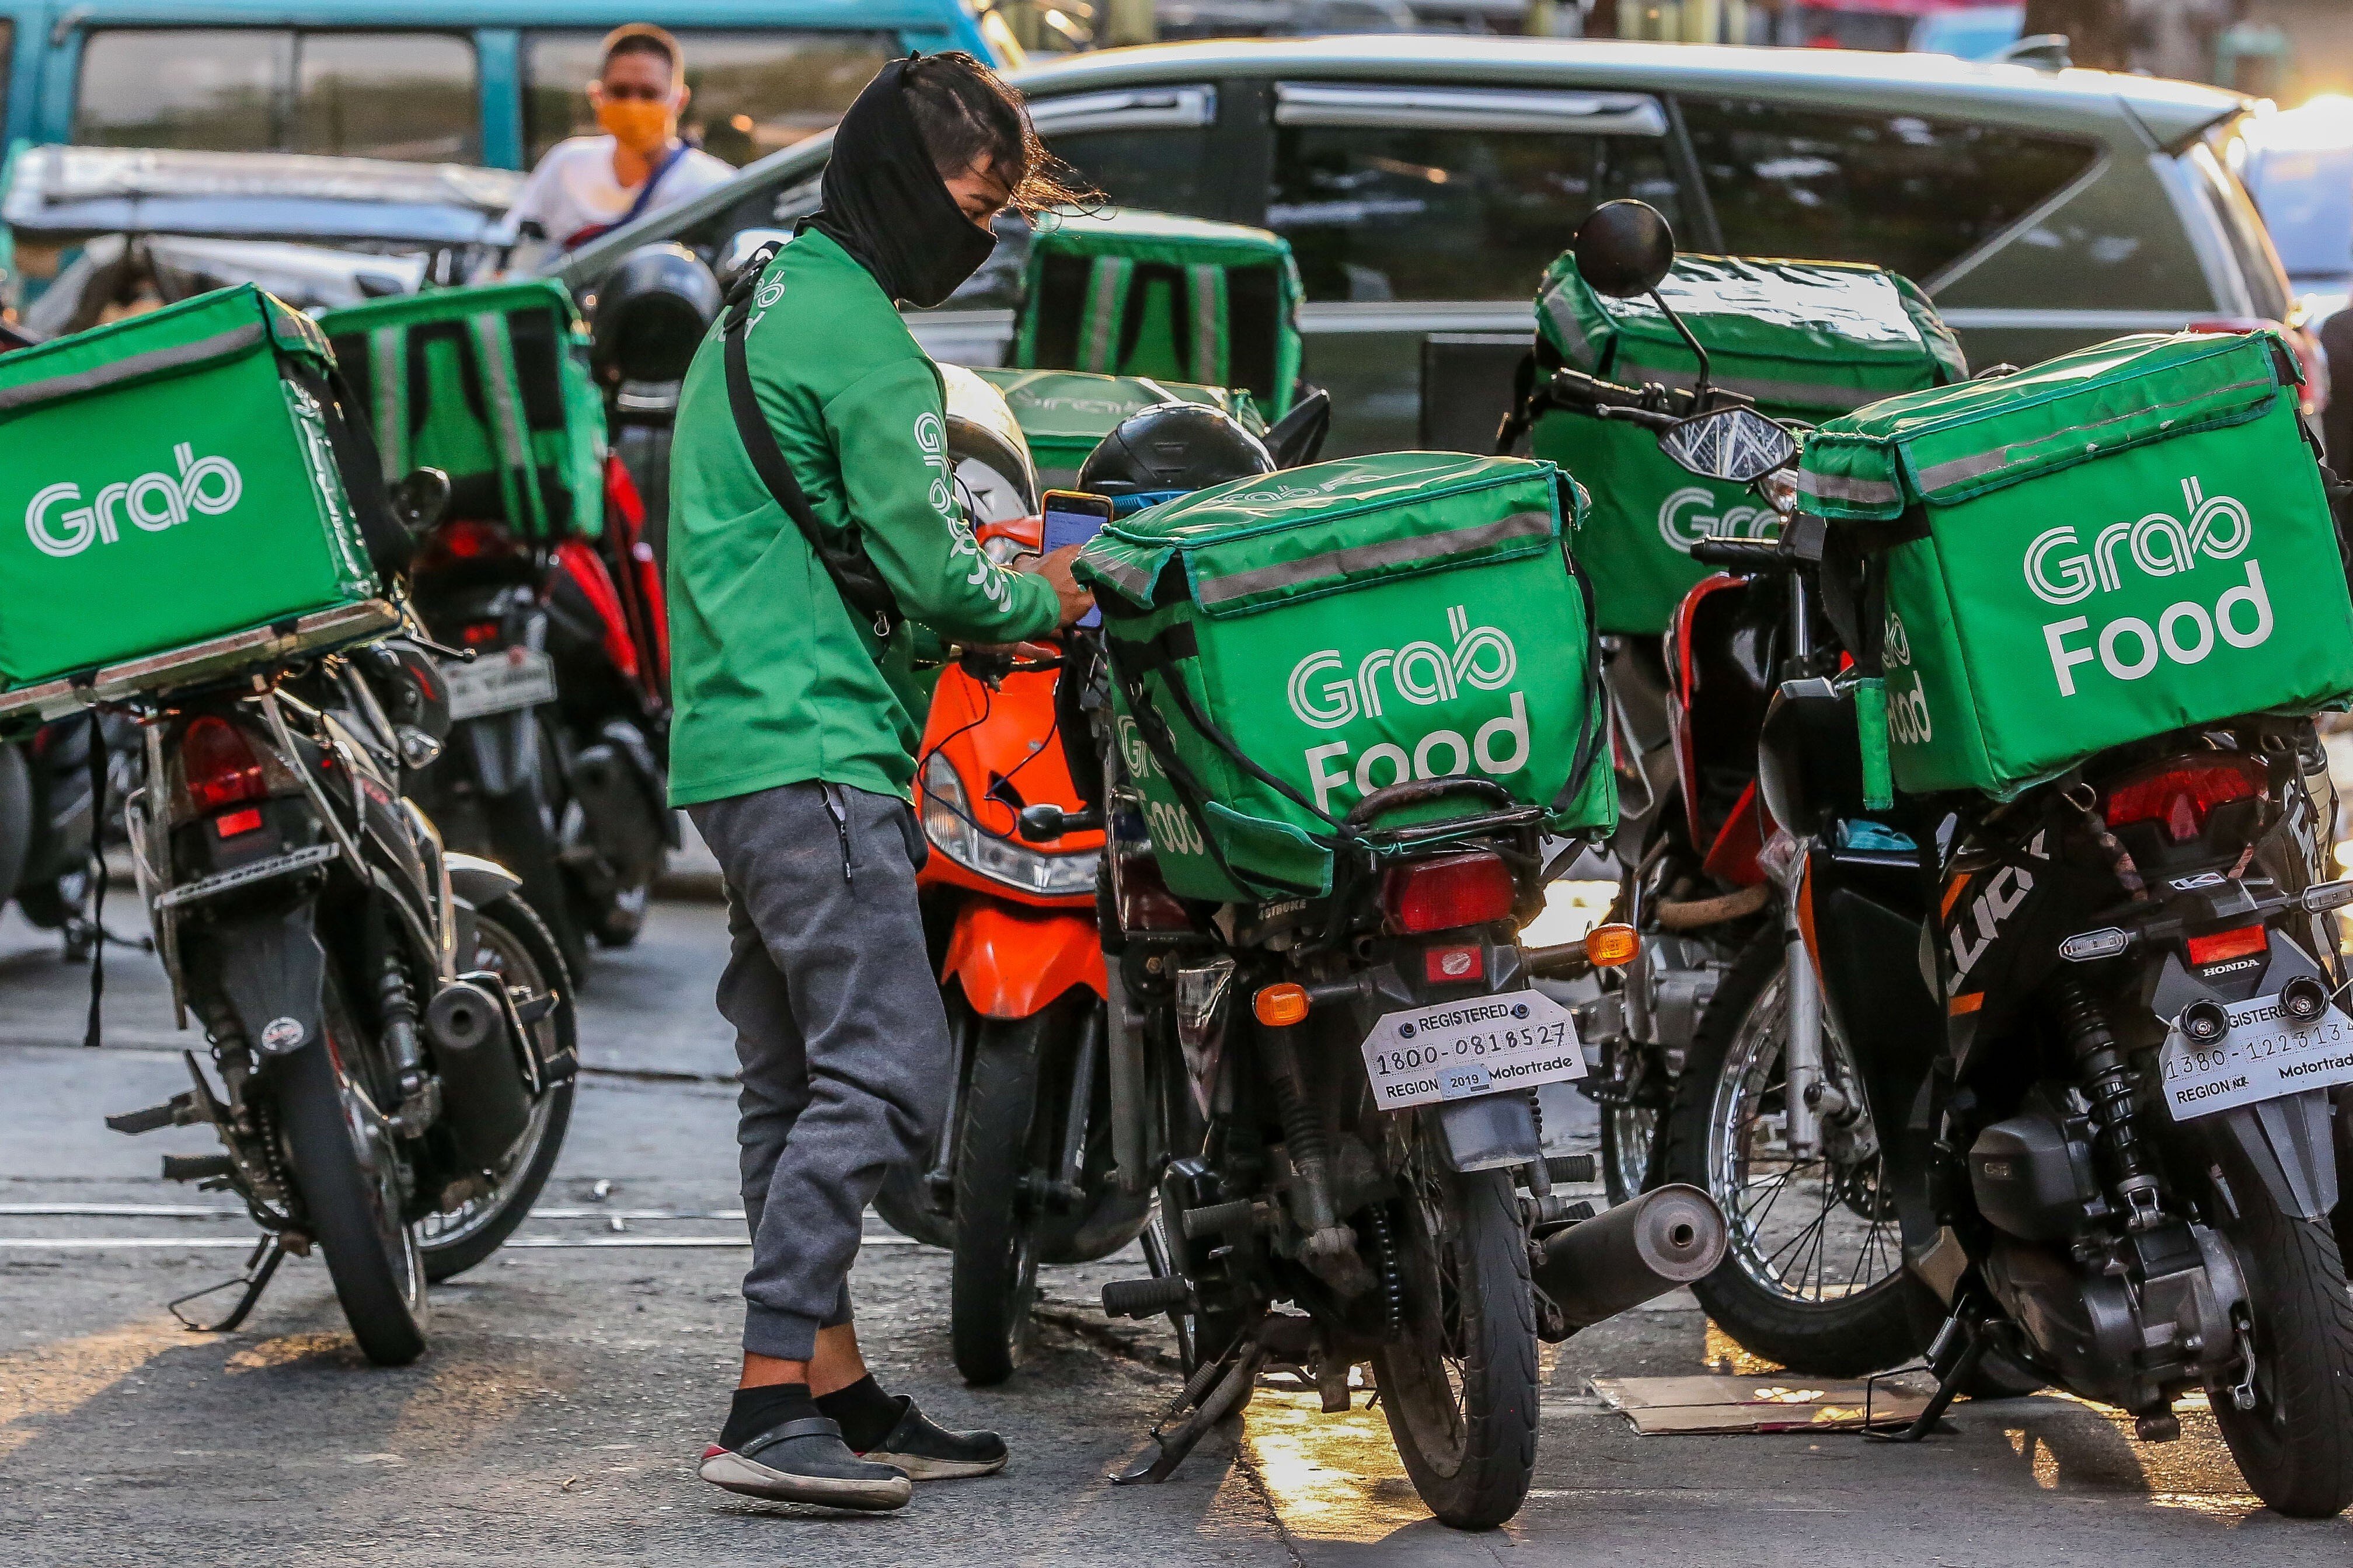 Grab employed 64,000 drivers over the course of the six-week lockdown. Photo: Xinhua